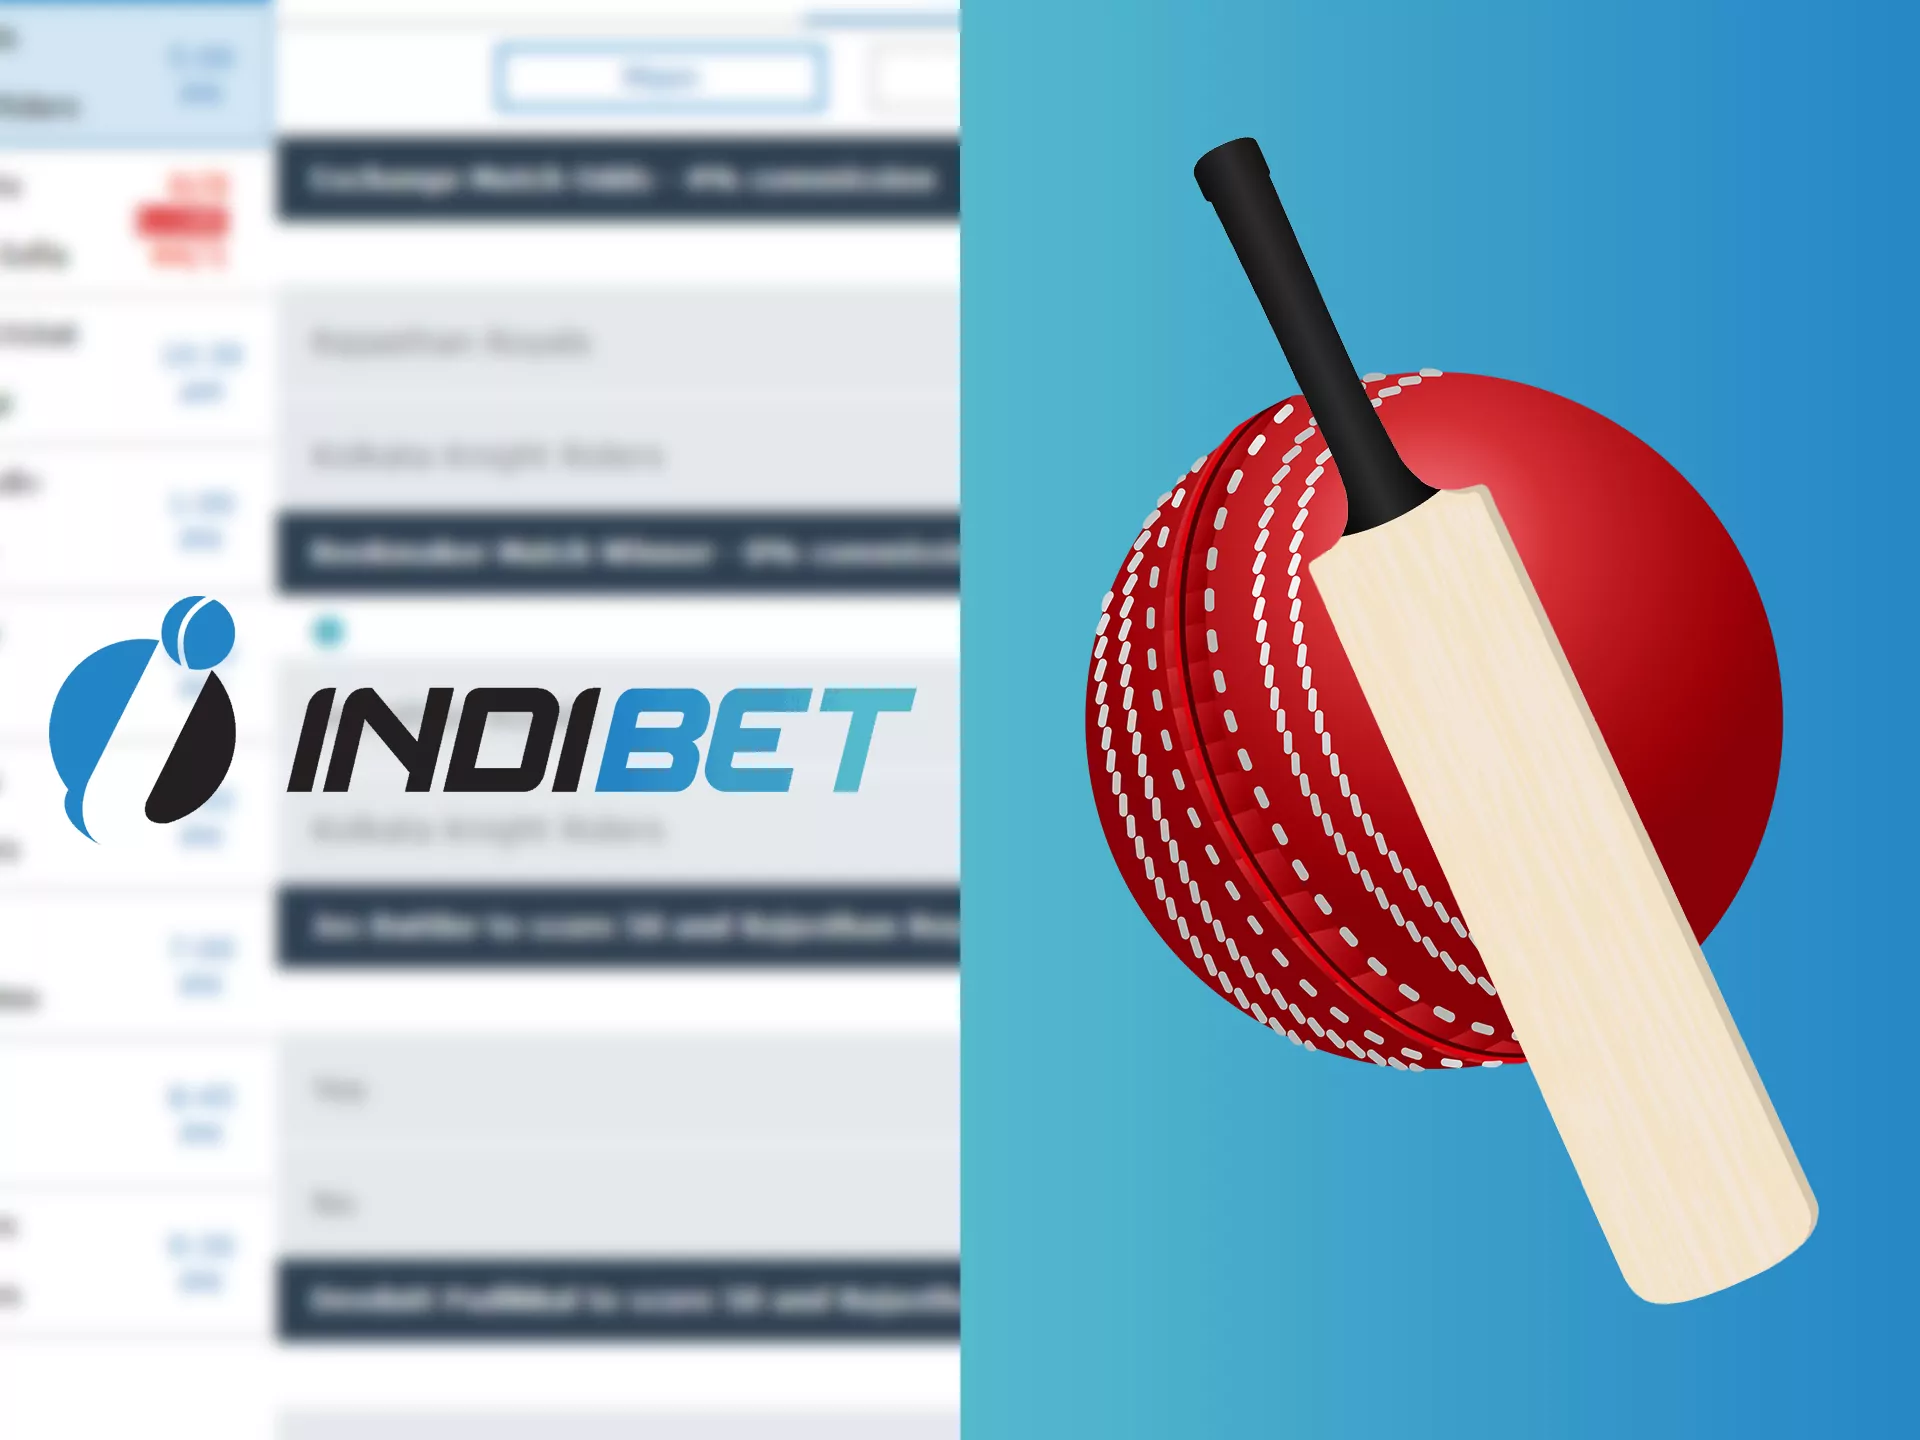 Bet on cricket matches at Indibet.